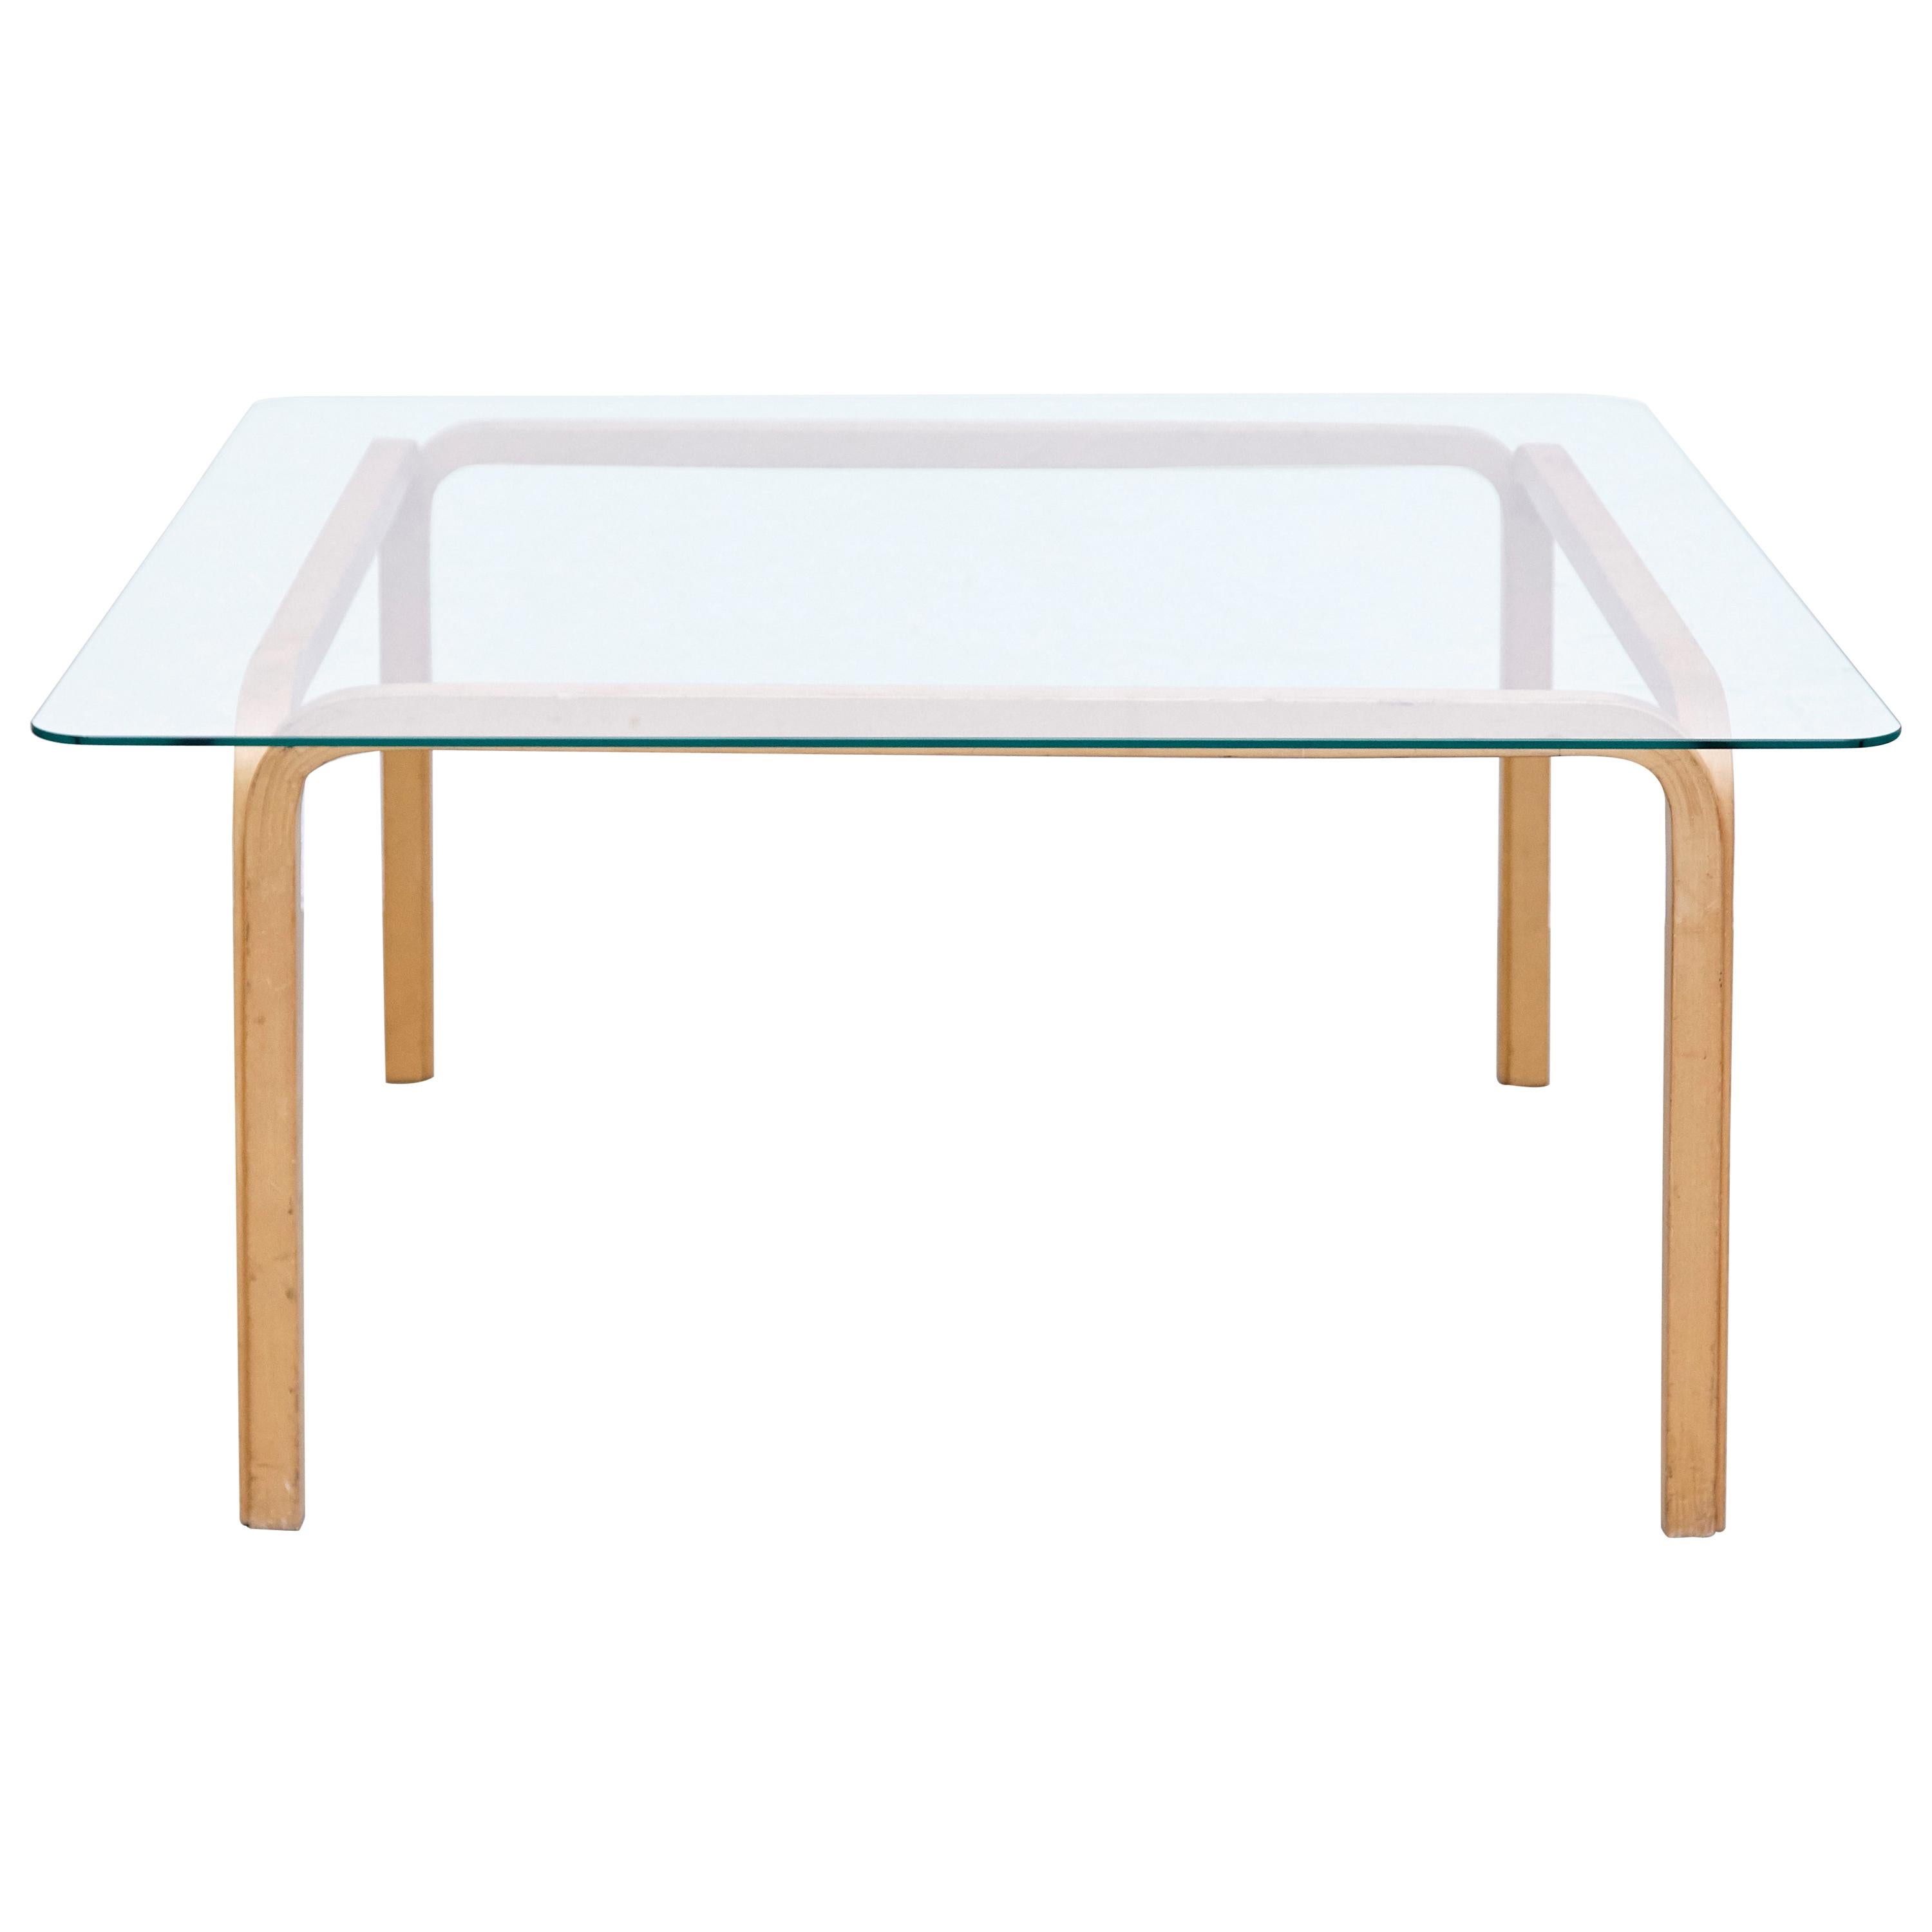 Alva Aalto, Mid-Century Modern, Glass and Wood Y805A Low Table, circa 1980